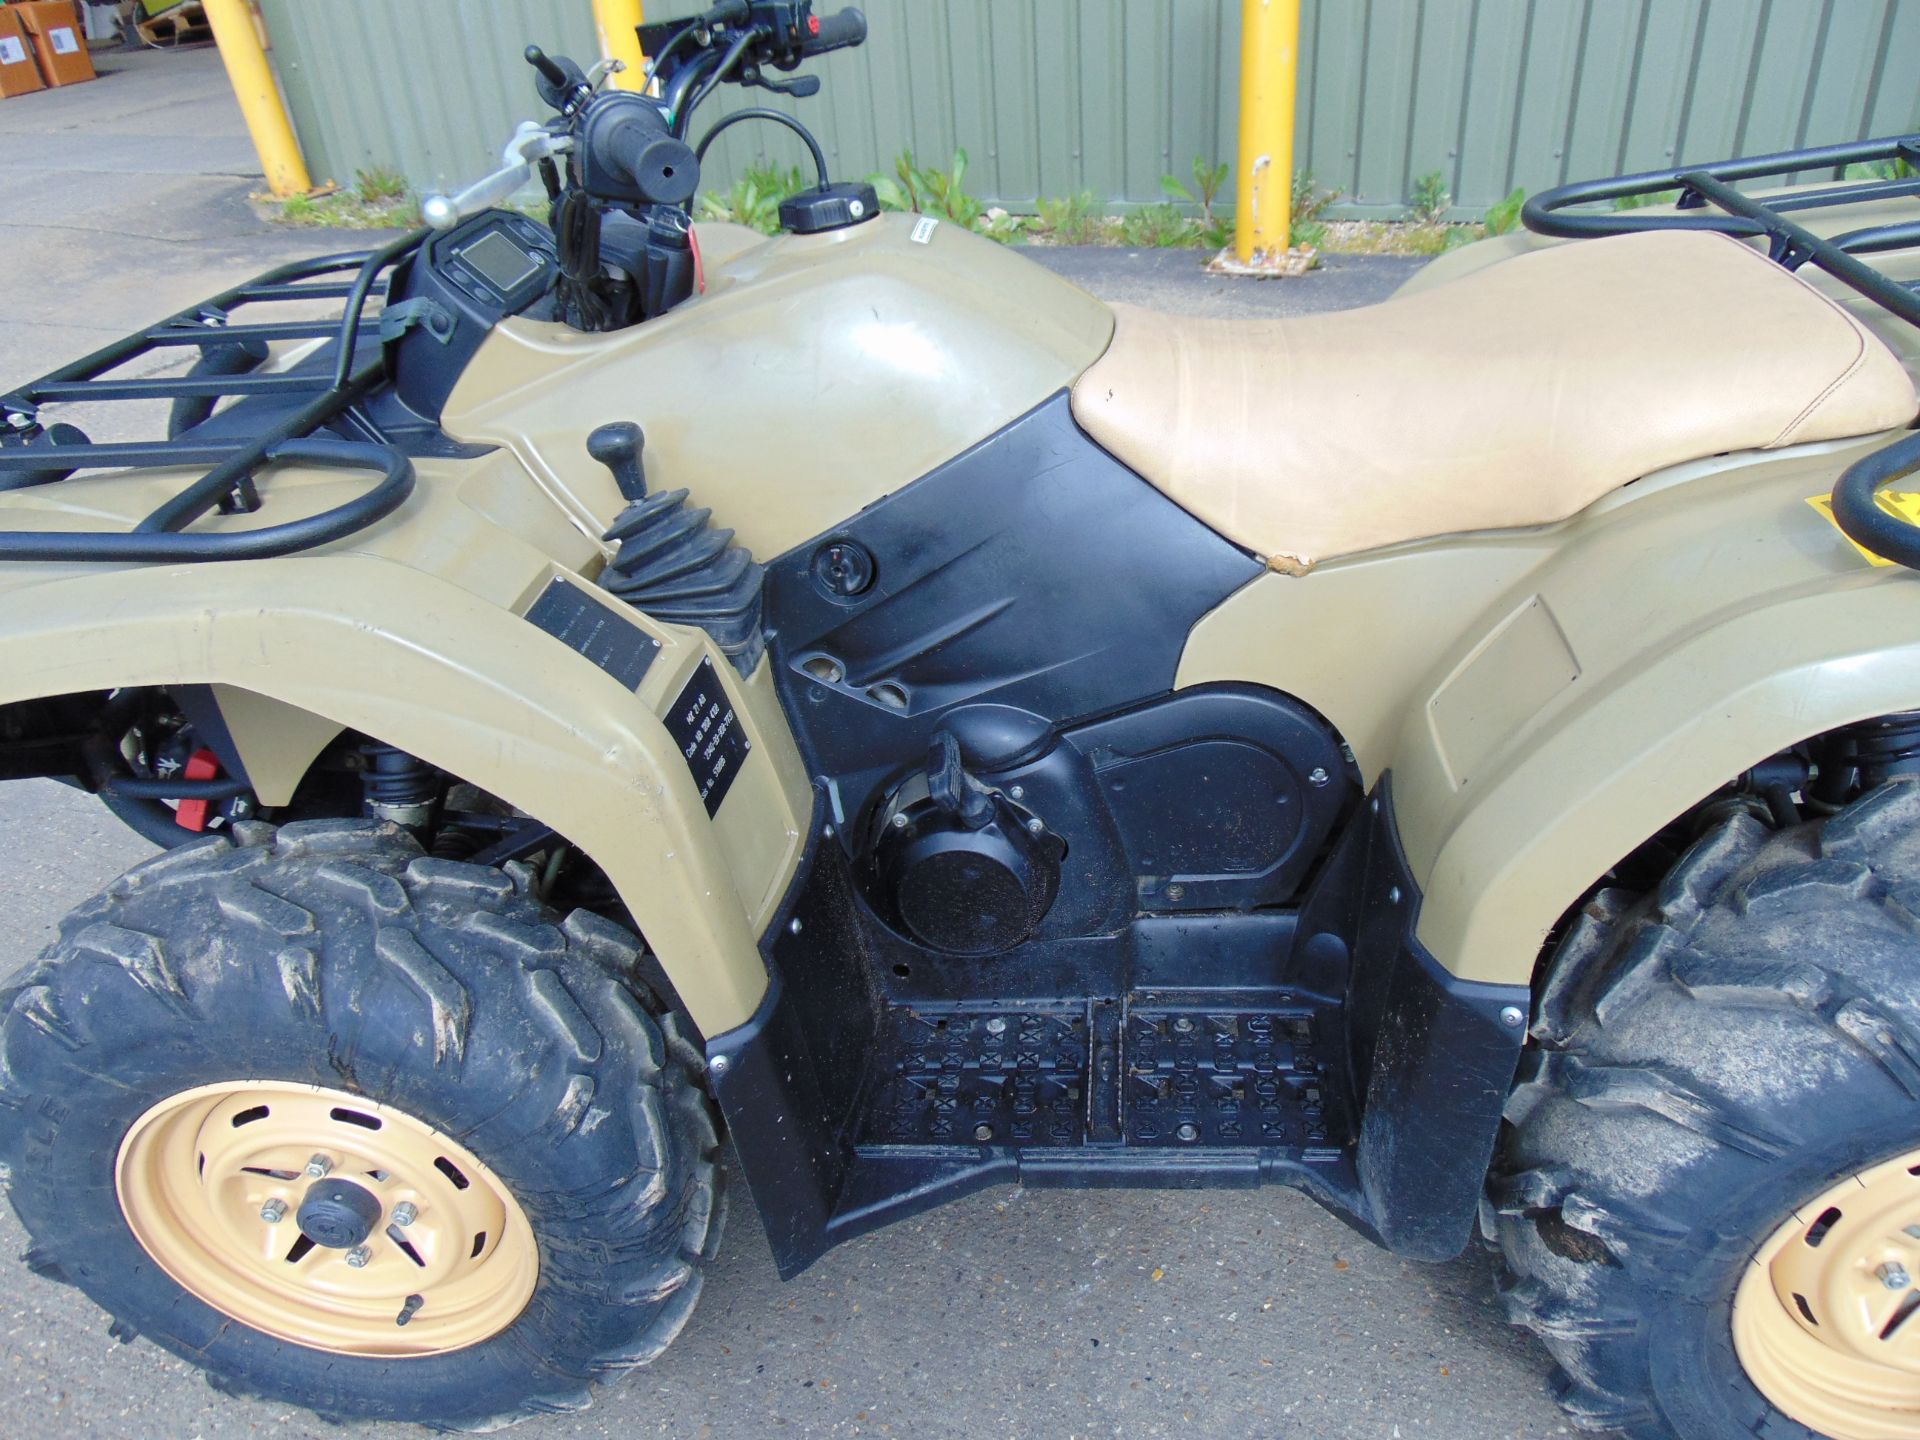 Yamaha Grizzly 450 4 x 4 ATV Quad Bike 584 hours only from MOD - Image 28 of 30